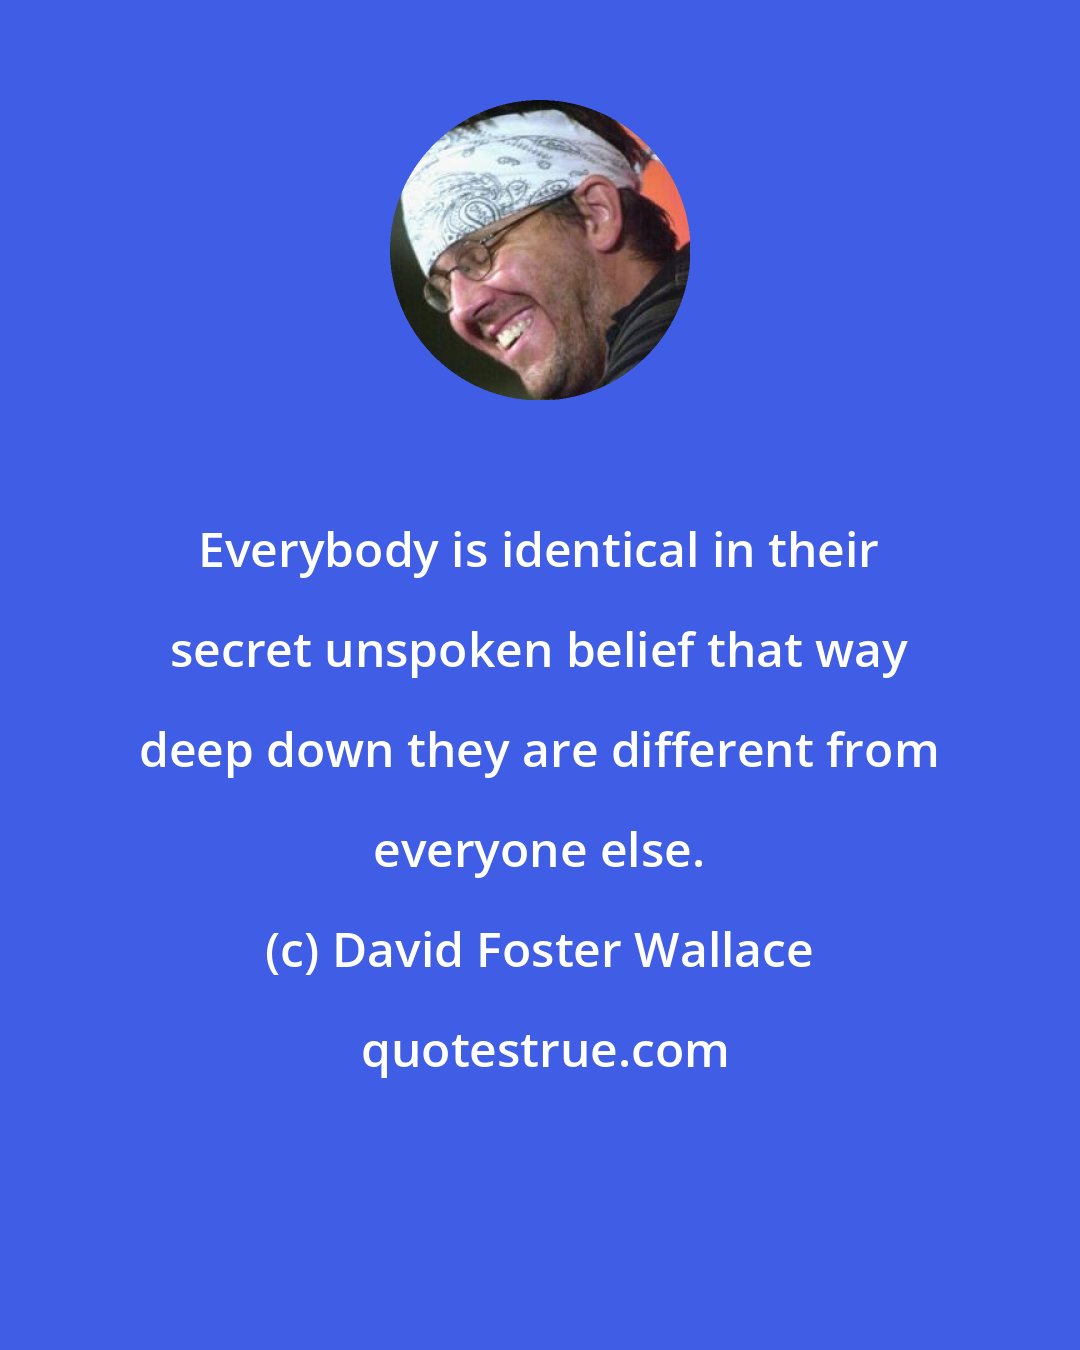 David Foster Wallace: Everybody is identical in their secret unspoken belief that way deep down they are different from everyone else.